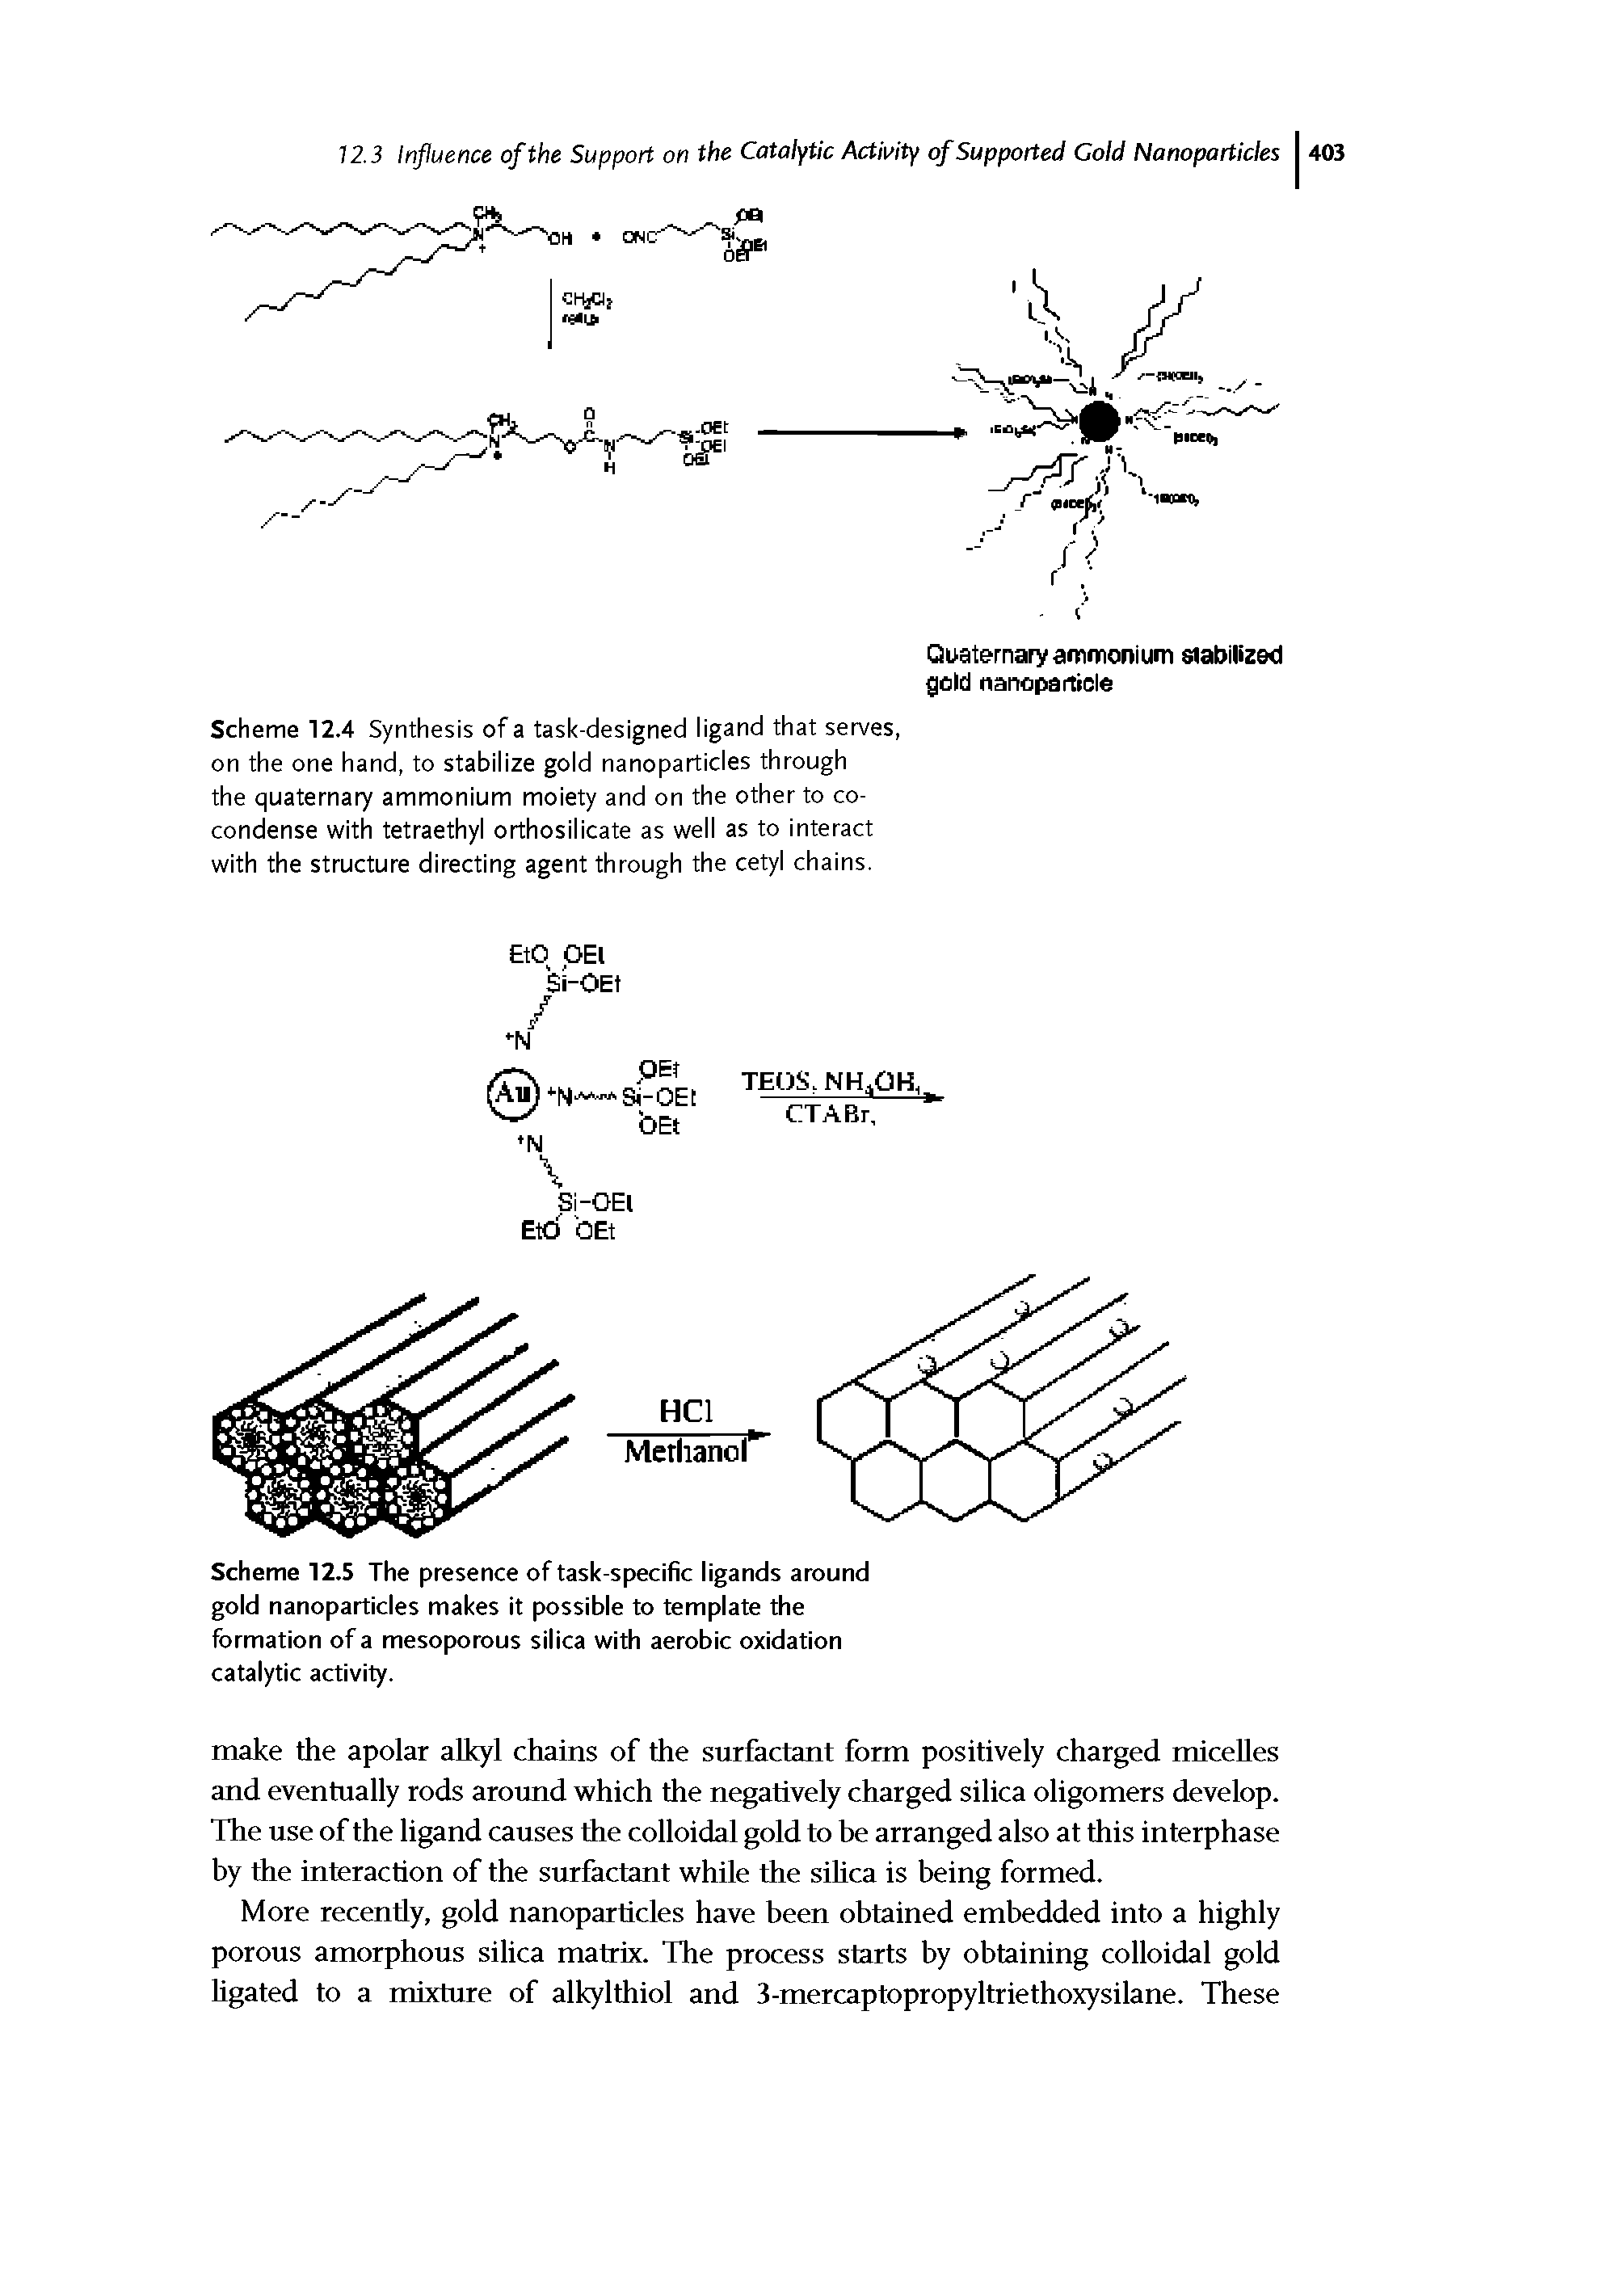 Scheme 12.4 Synthesis of a task-designed ligand that serves, on the one hand, to stabilize gold nanoparticles through the quaternary ammonium moiety and on the other to cocondense with tetraethyl orthoslllcate as well as to interact with the structure directing agent through the cetyl chains.